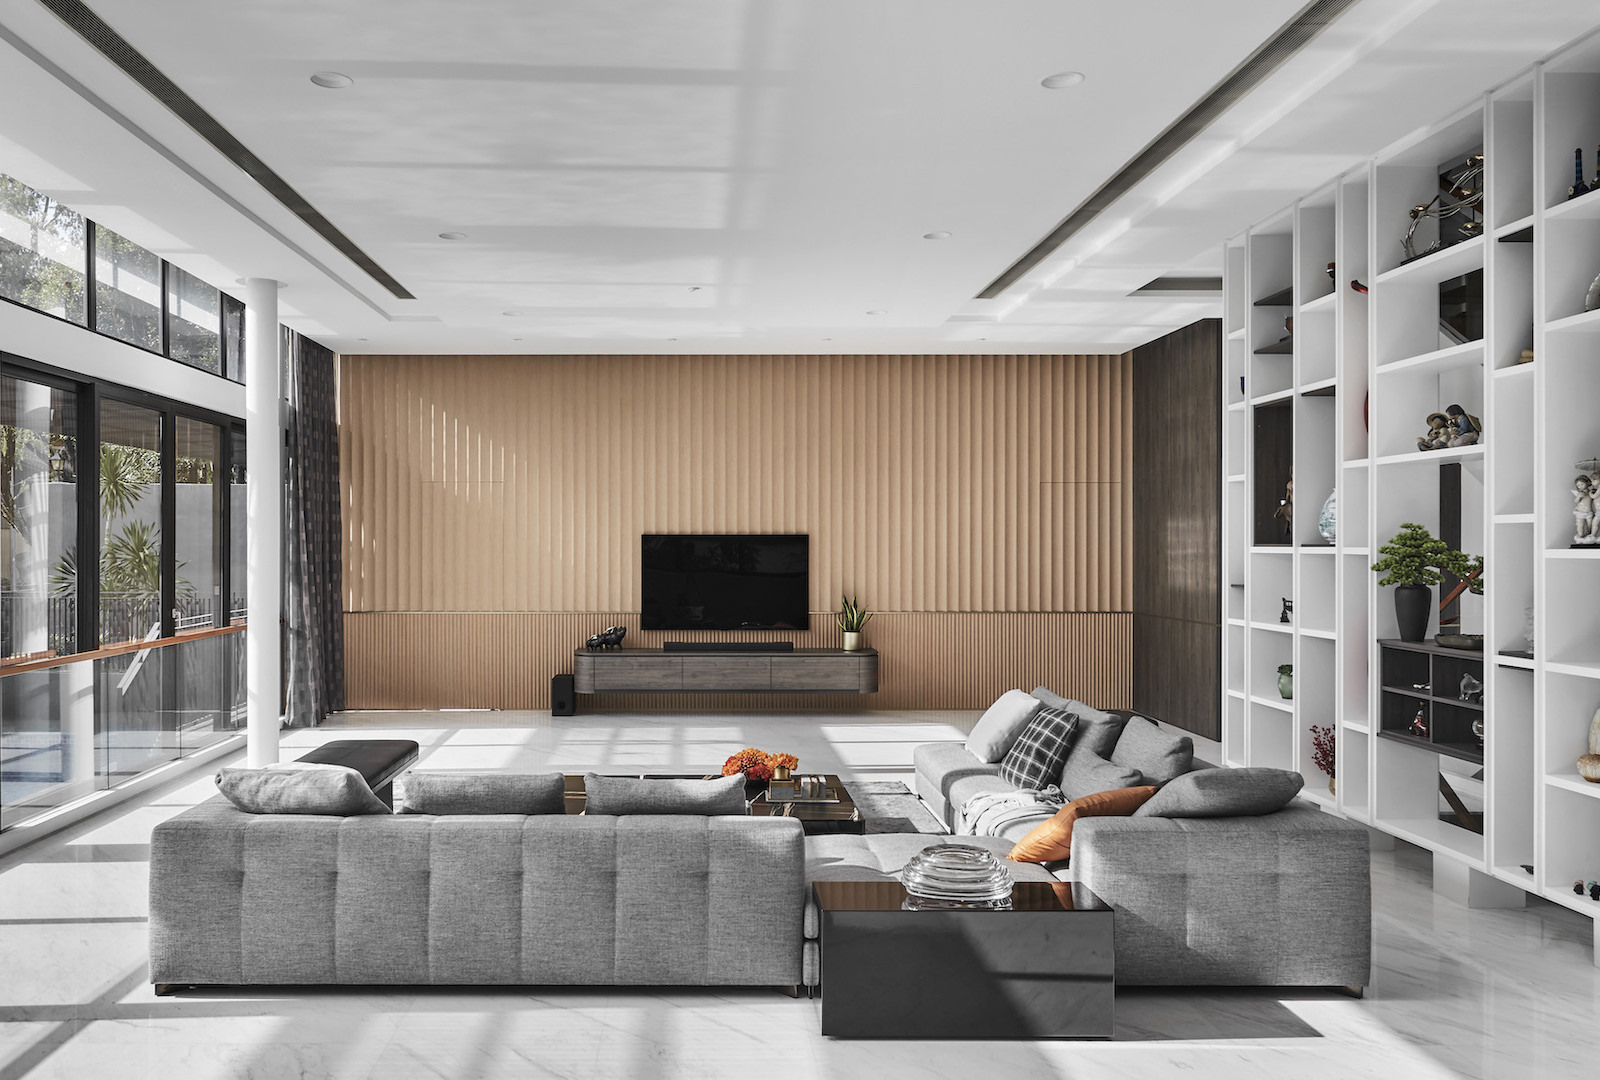 A modern living room with large windows and white furniture.